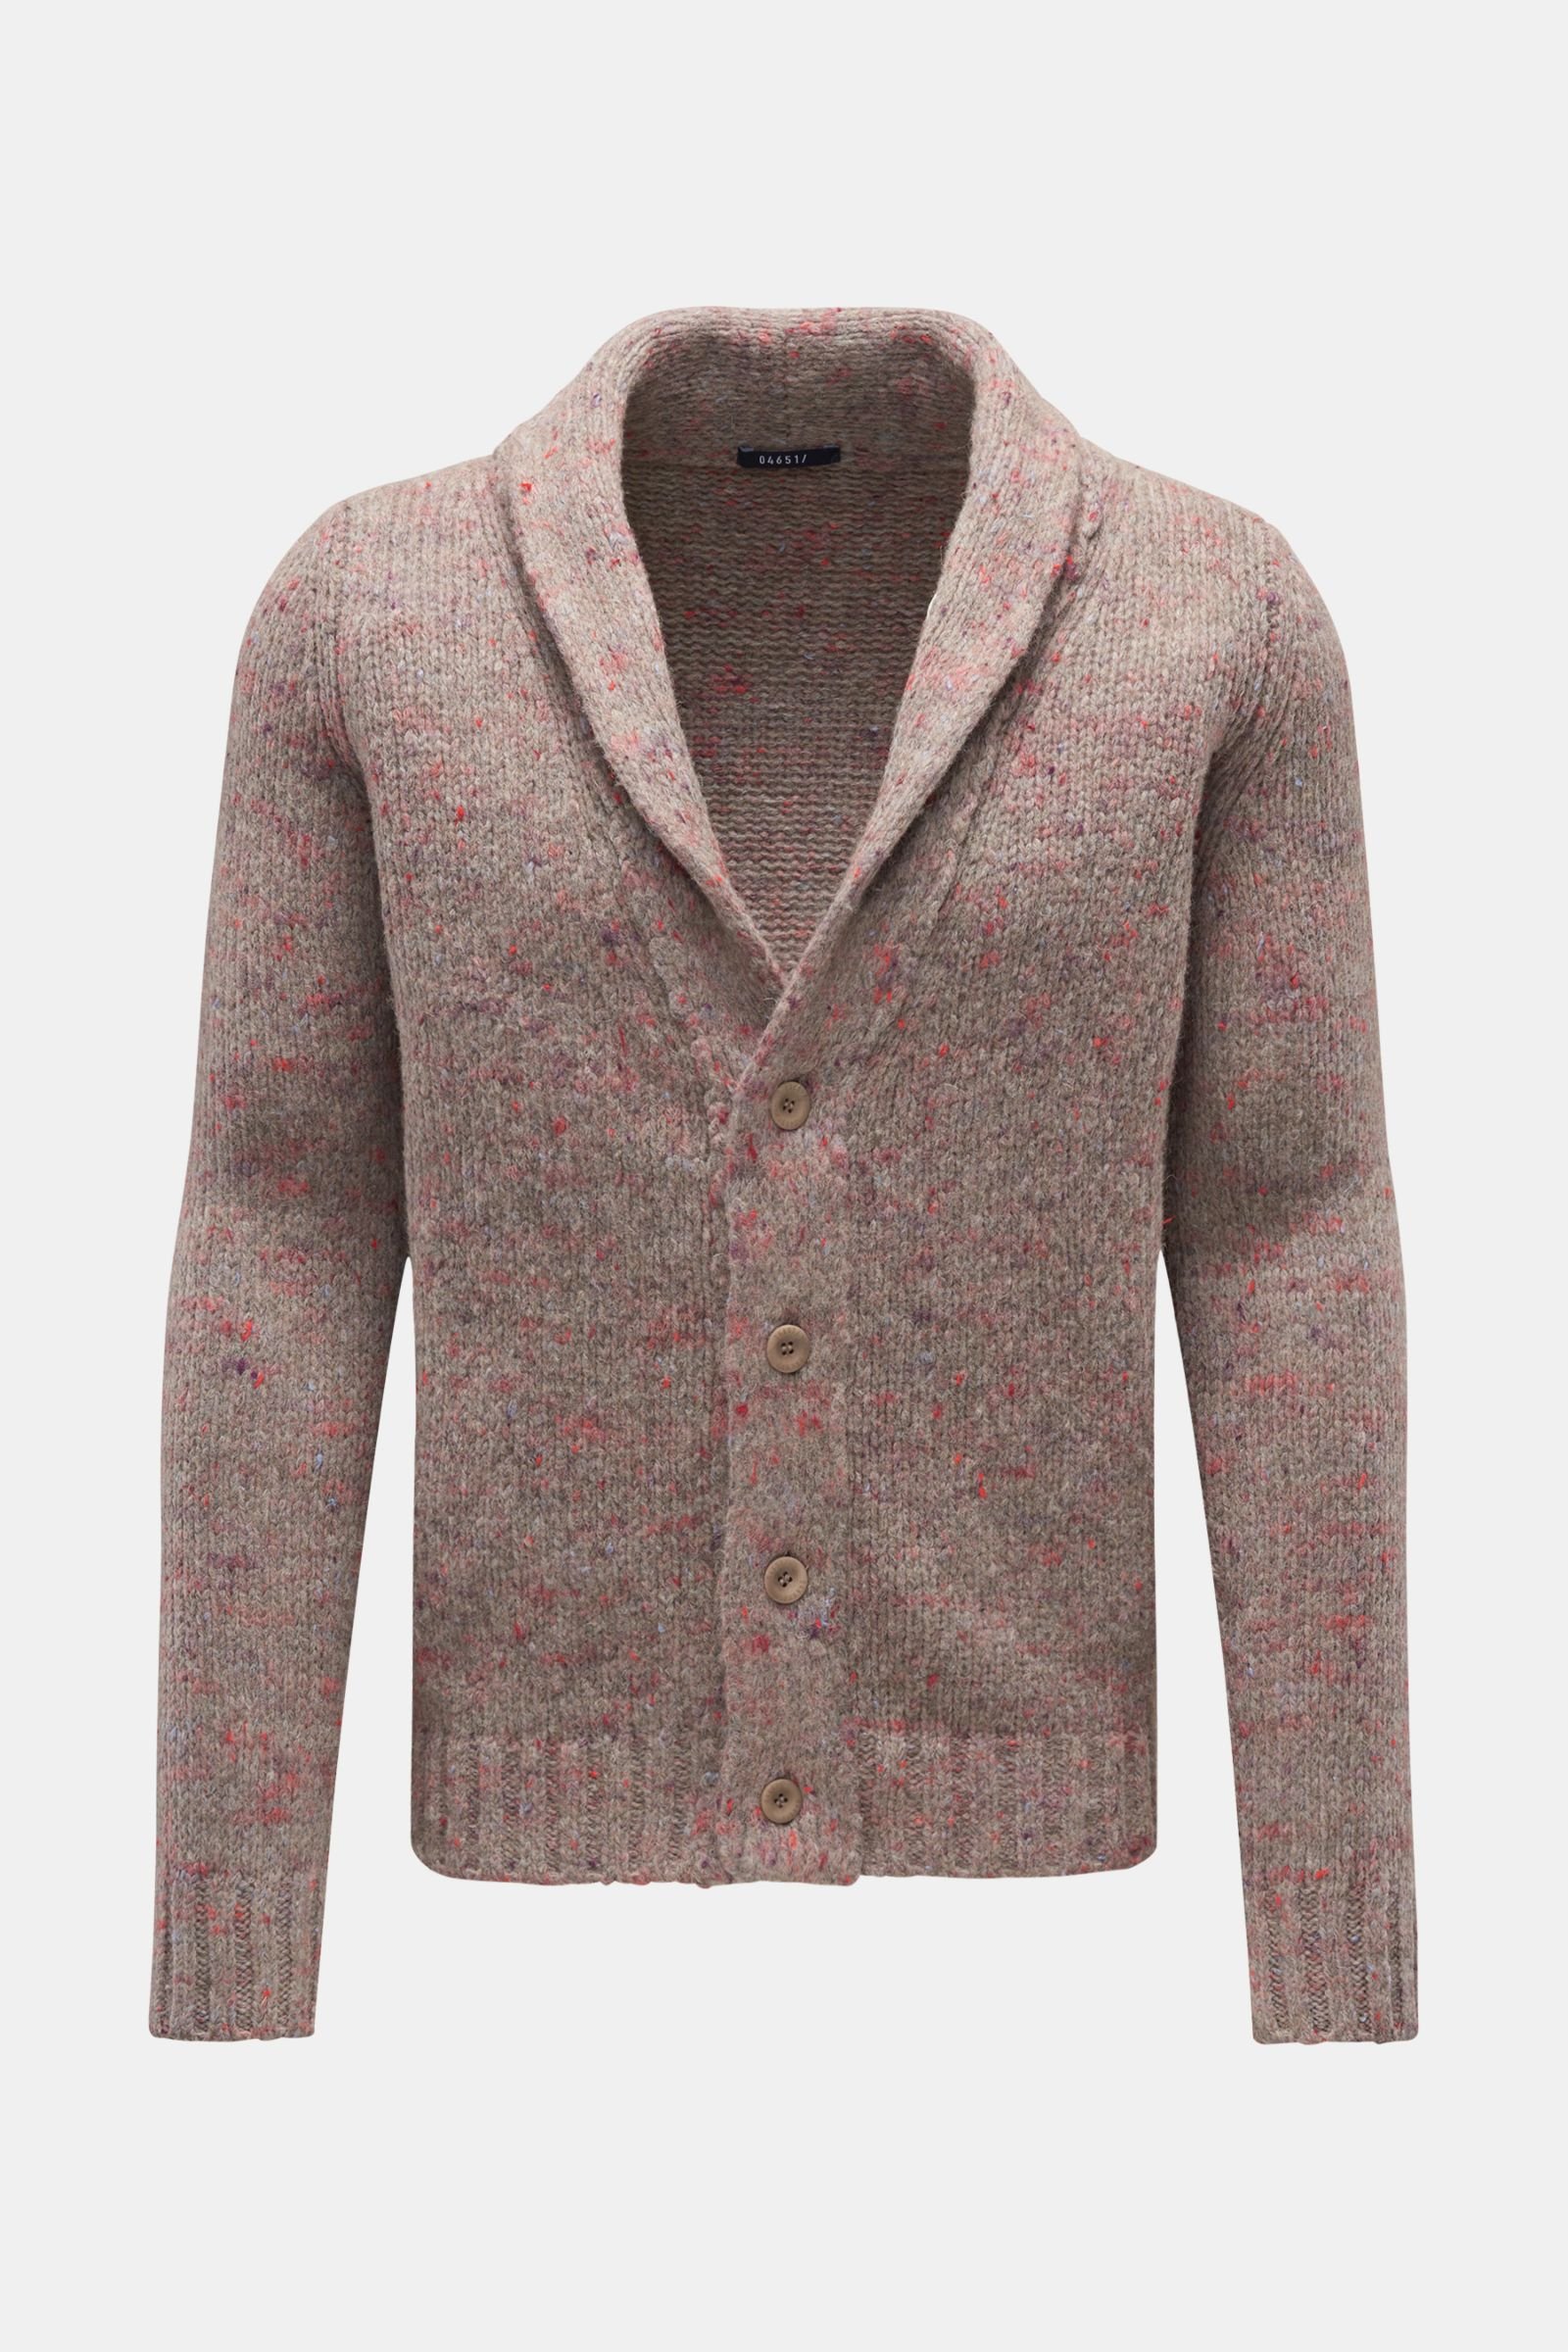 Cardigan 'Donegal' grey-brown/light red patterned